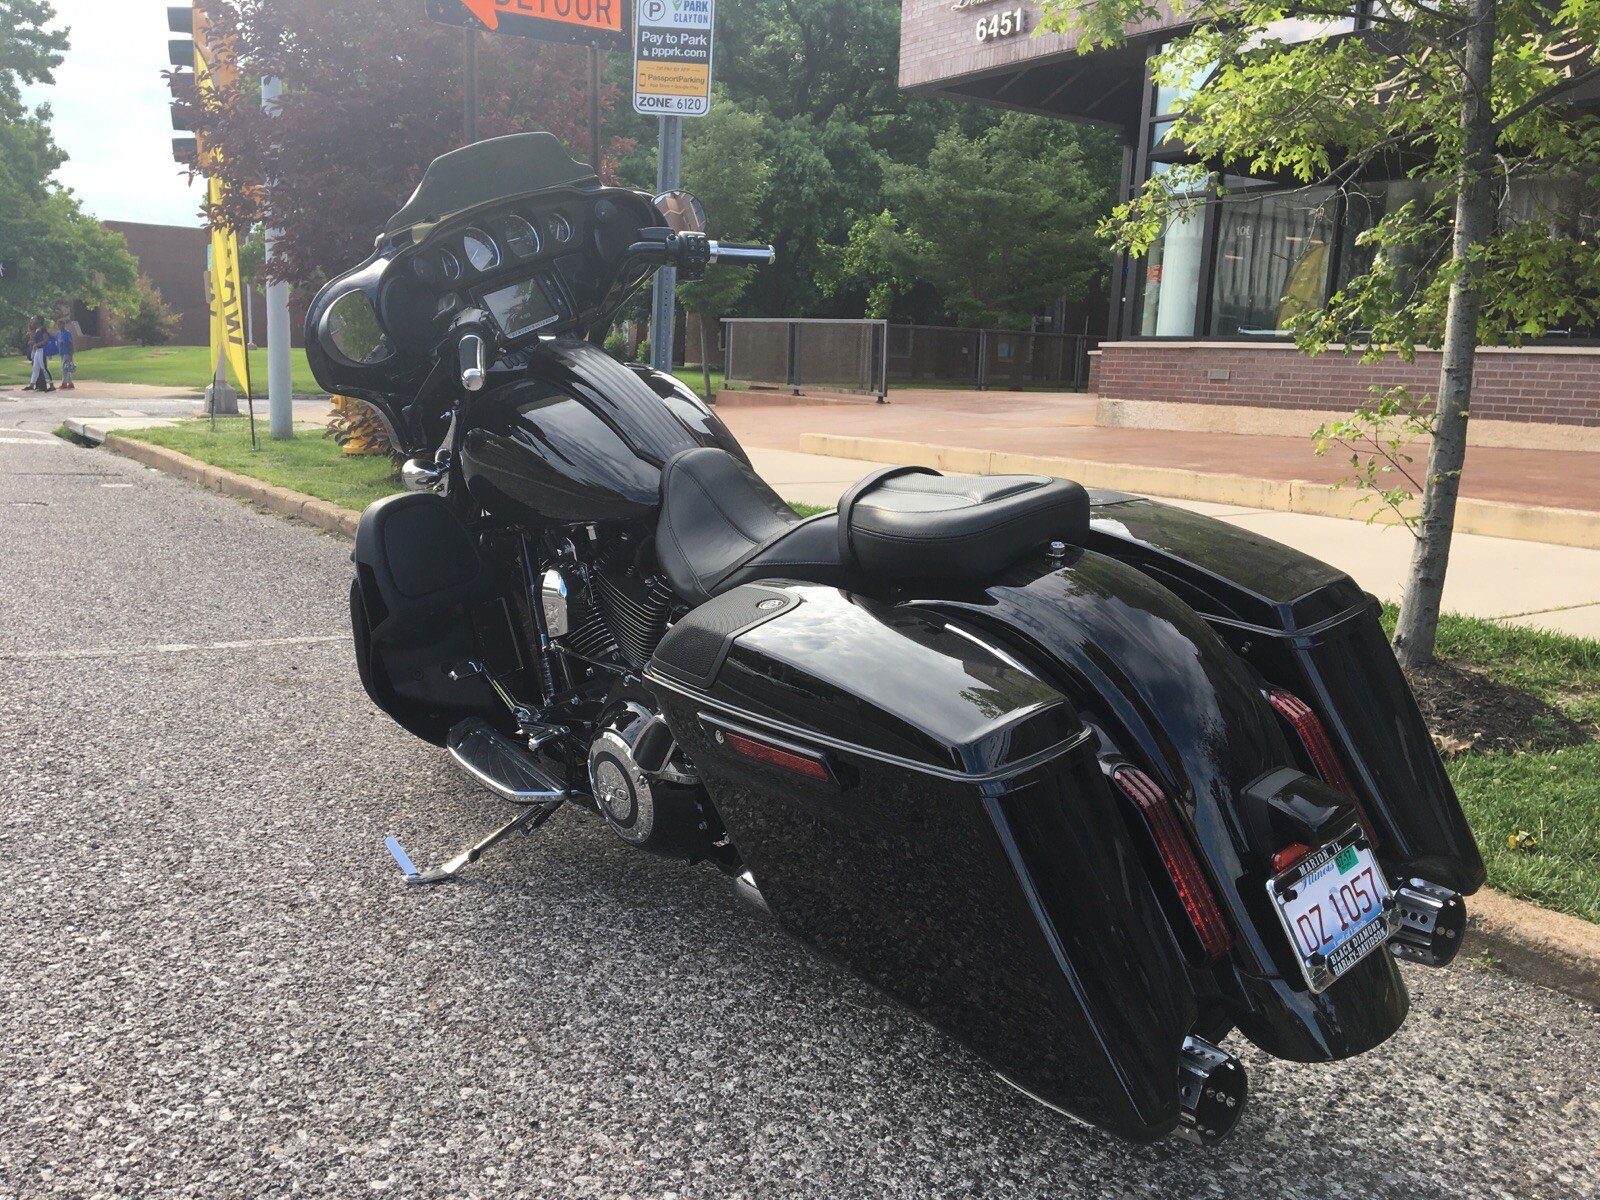 2015 Harley Davidson Touring Street Glide Special For Sale Near My Vernon Illinois 62864 Motorcycles On Autotrader